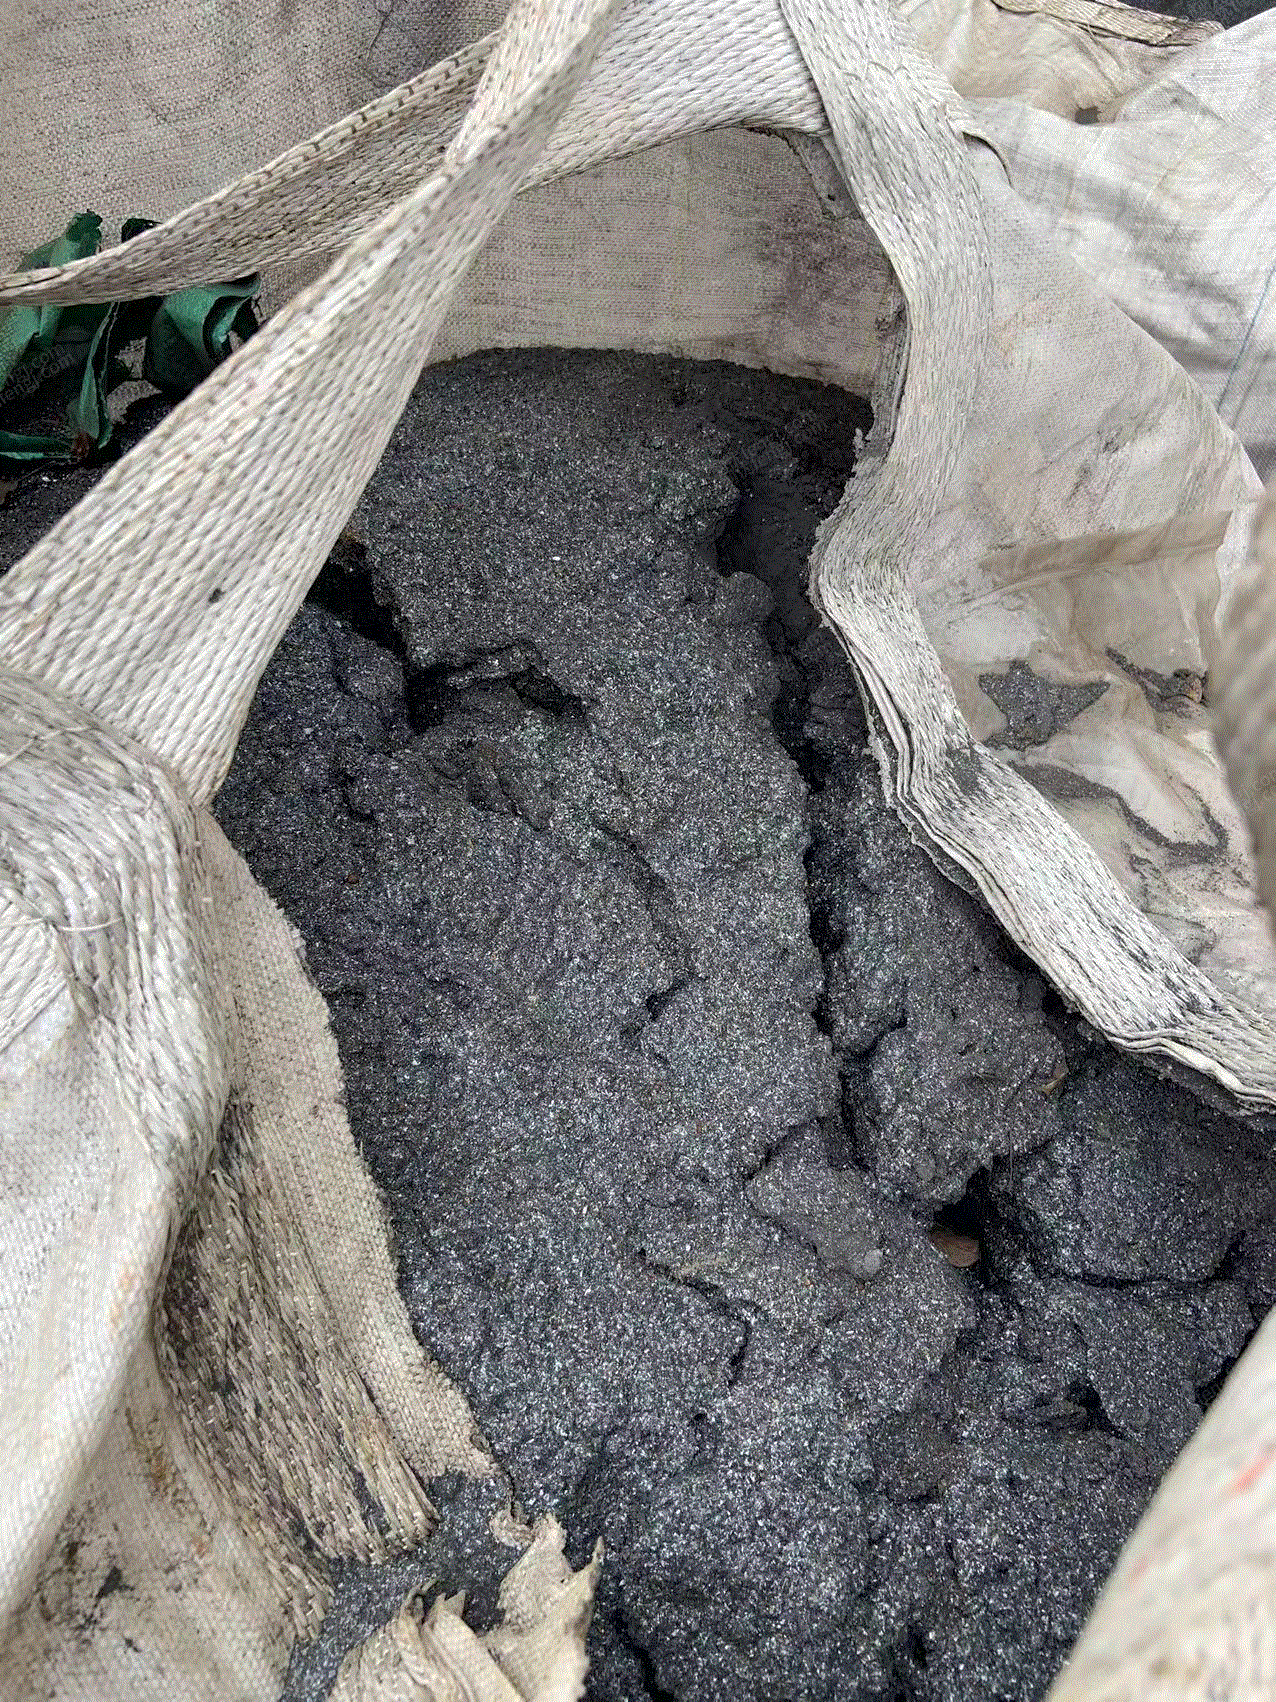 Sold 30 tons of oxide skin from the wire drawing factory. The goods are in Fengxian District, Shanghai, self picked